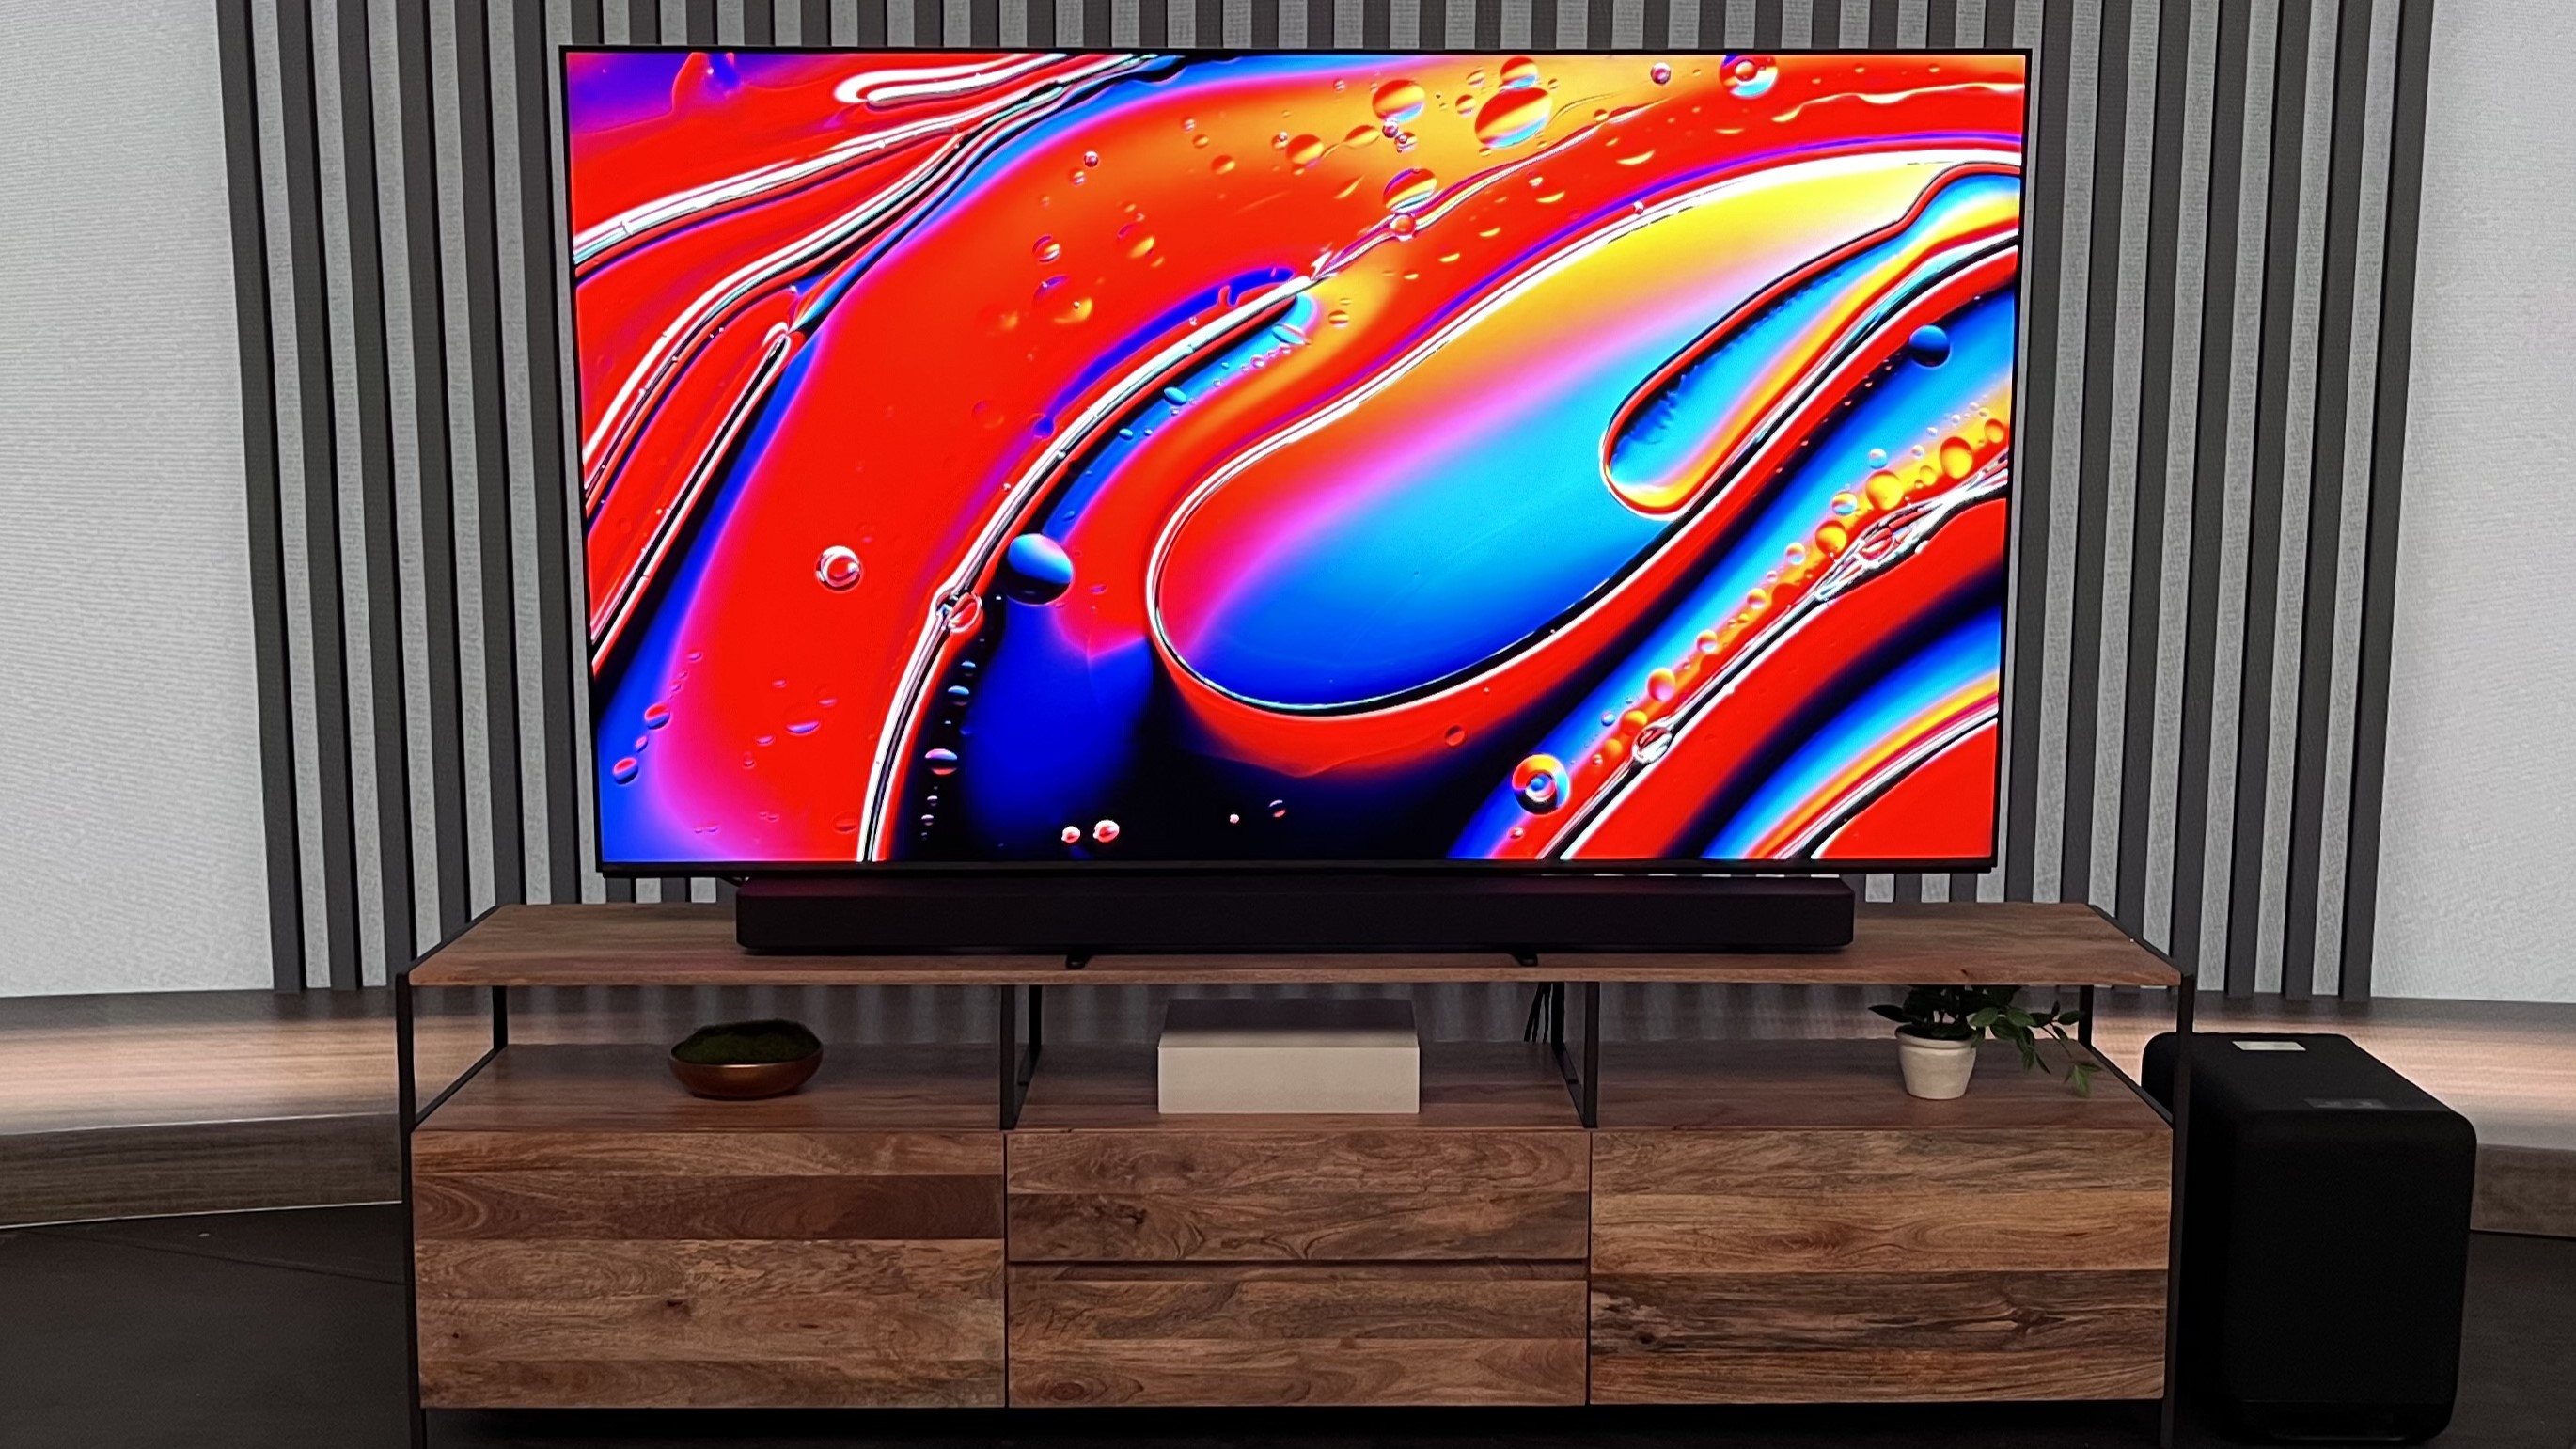 Sony Bravia 9 TV displaying colorful abstract image